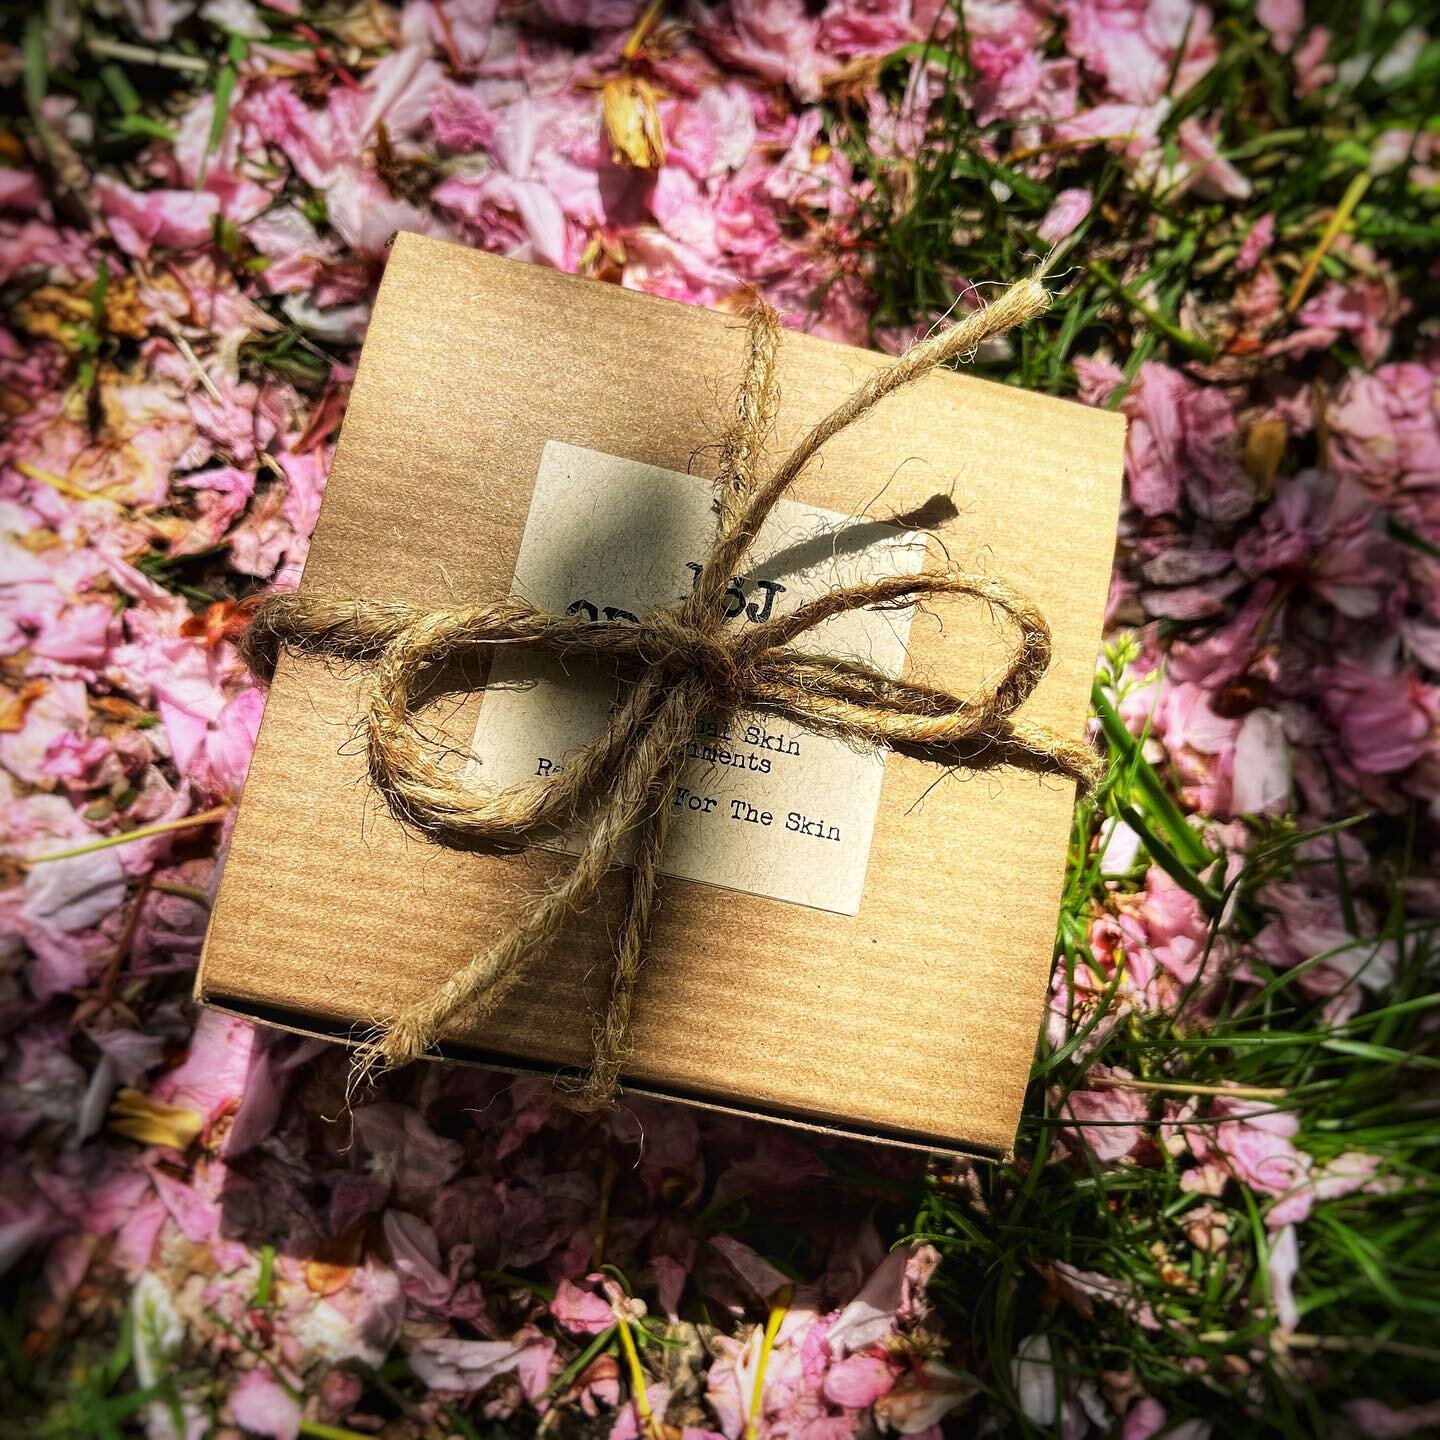 🌸 This Mother's Day, give the gift of radiant, nourished skin with 16J Organics! 💝

Show Mom how much you care with our handcrafted, all-natural, and organic skincare products, thoughtfully designed to pamper and rejuvenate her skin. 🌿

Choose fro